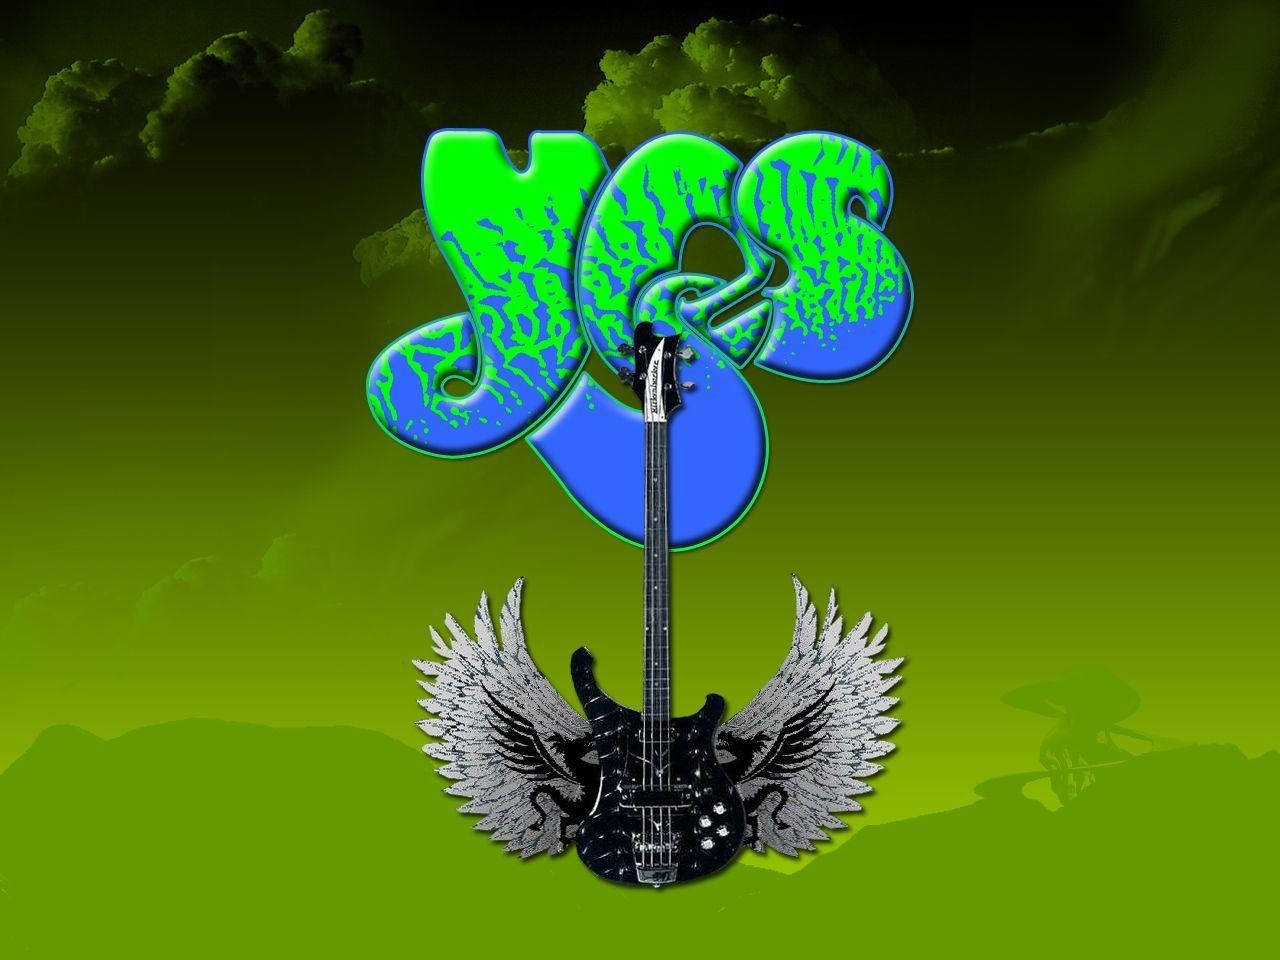 Yes Band Acoustic Guitar Wallpaper